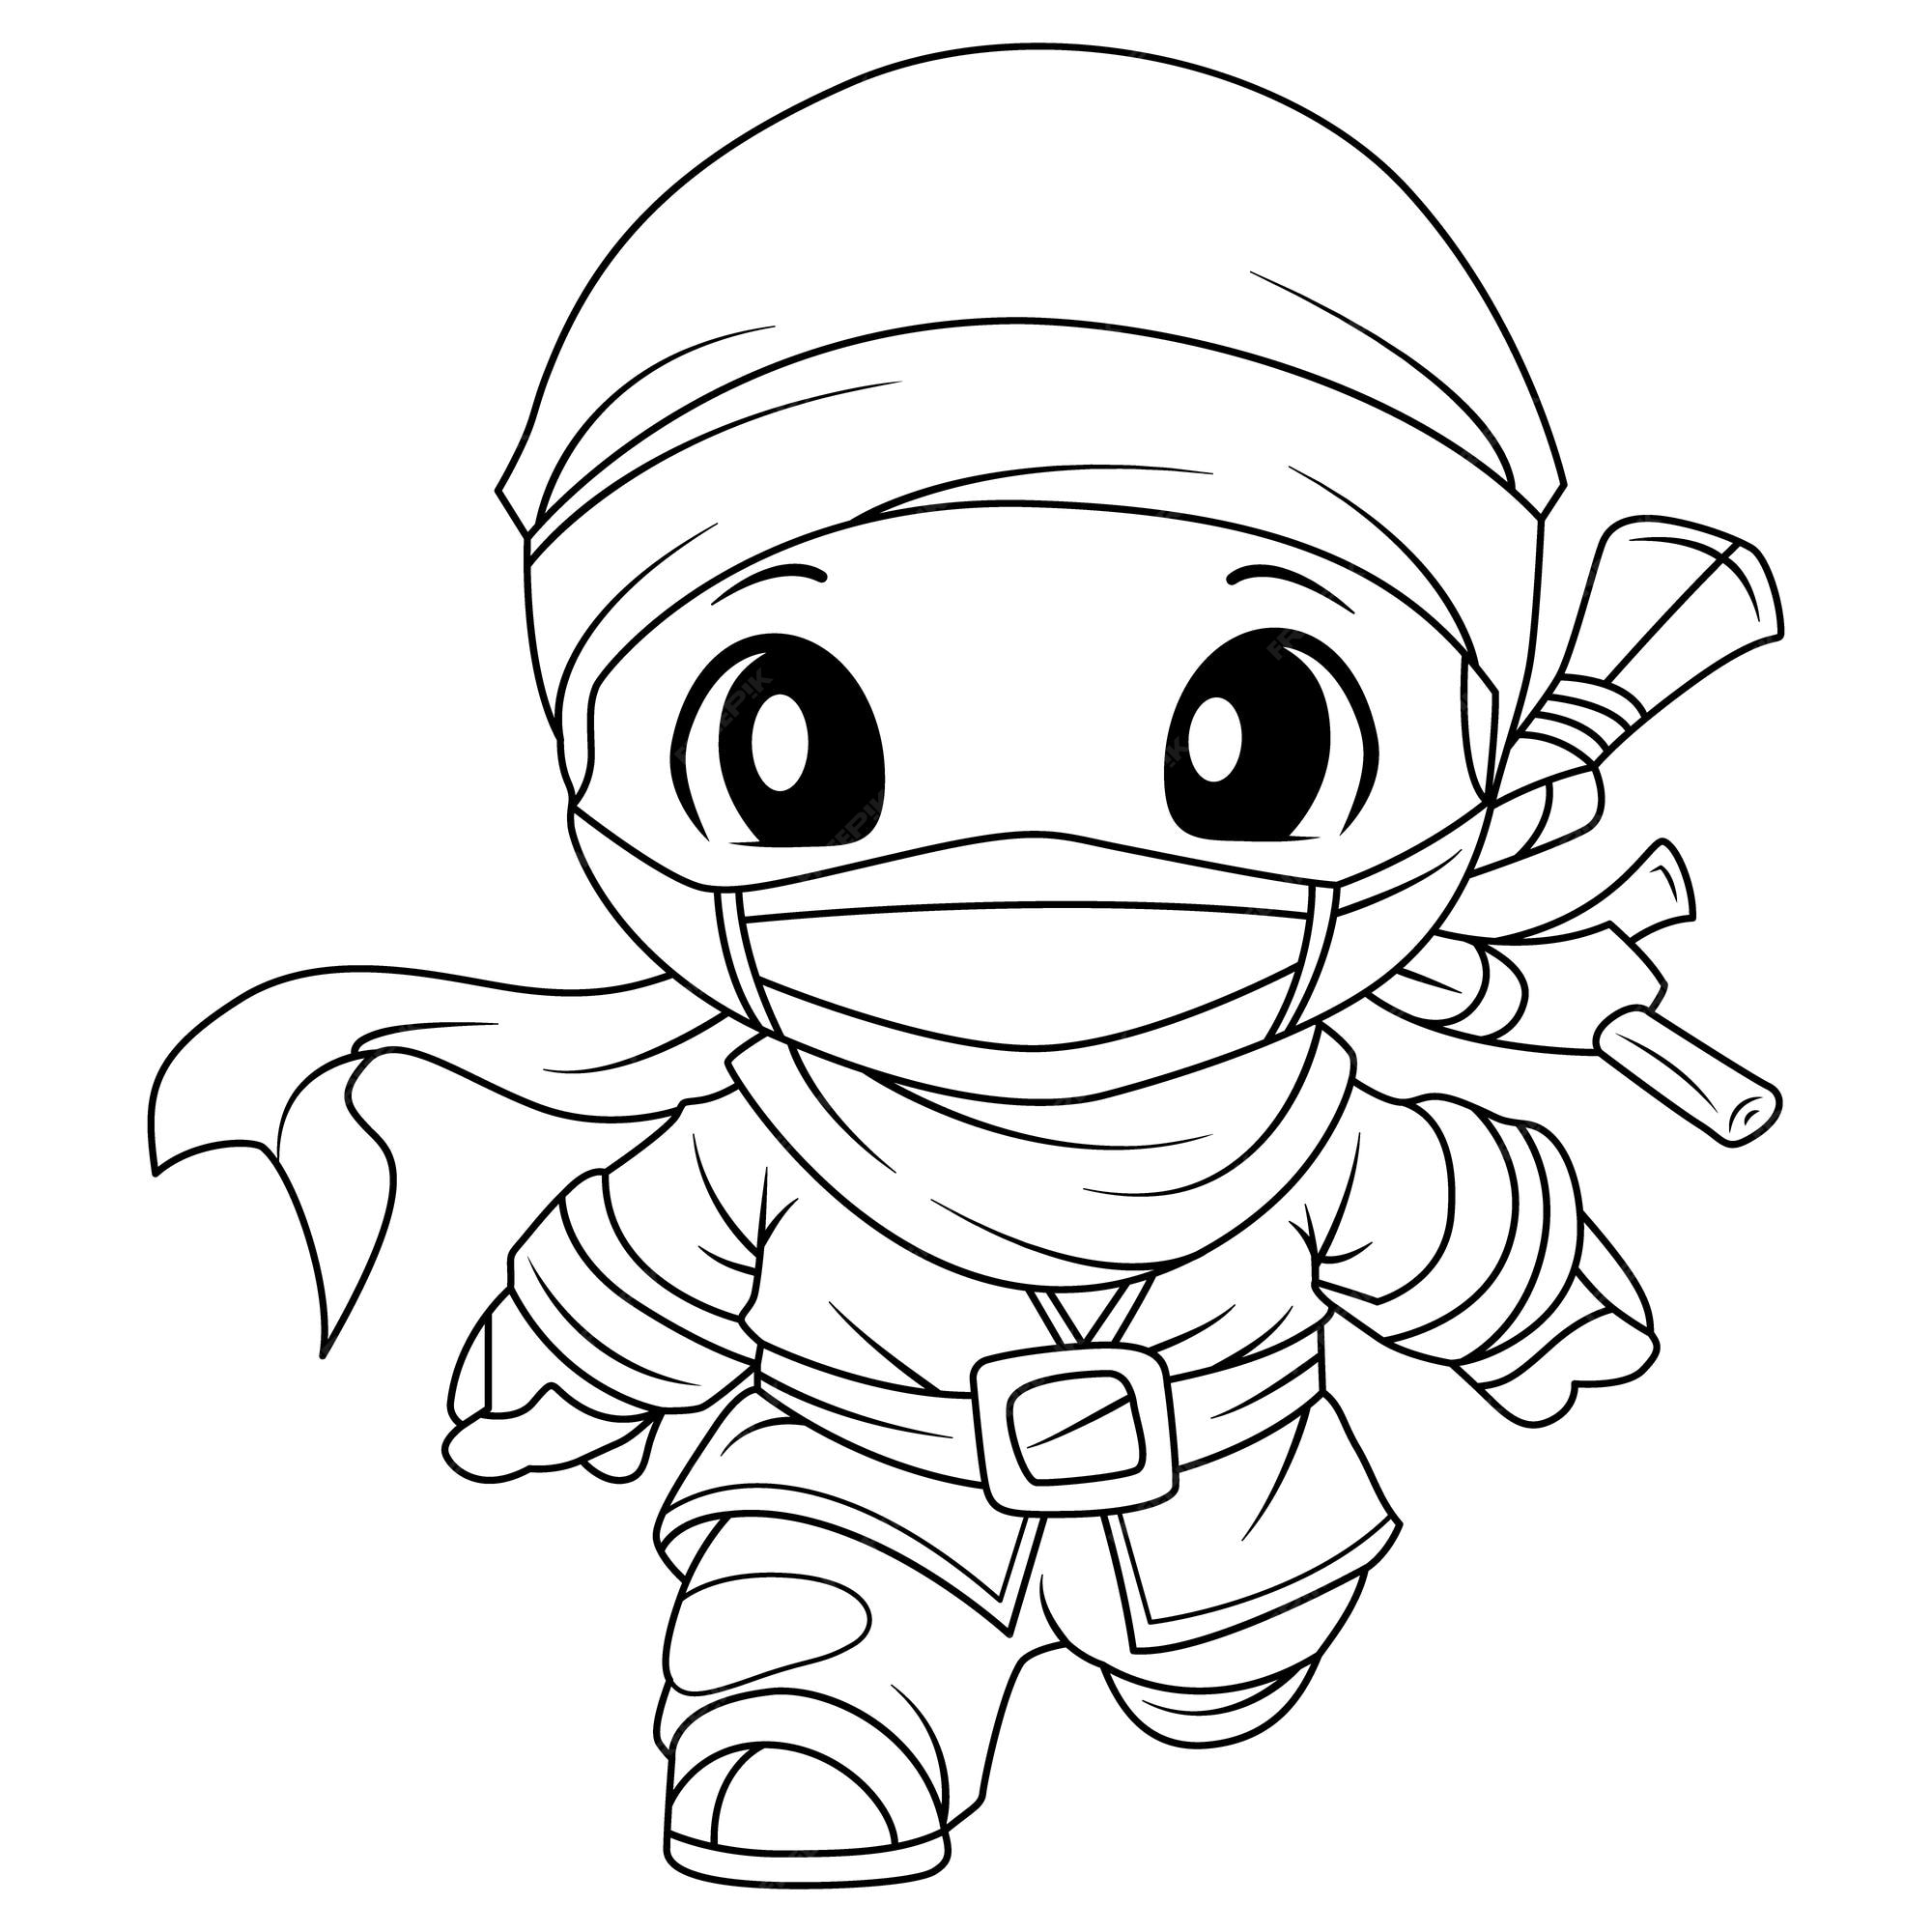 Premium vector cute ninja samurai coloring page for kids isolated clean and minimalistic line artwork